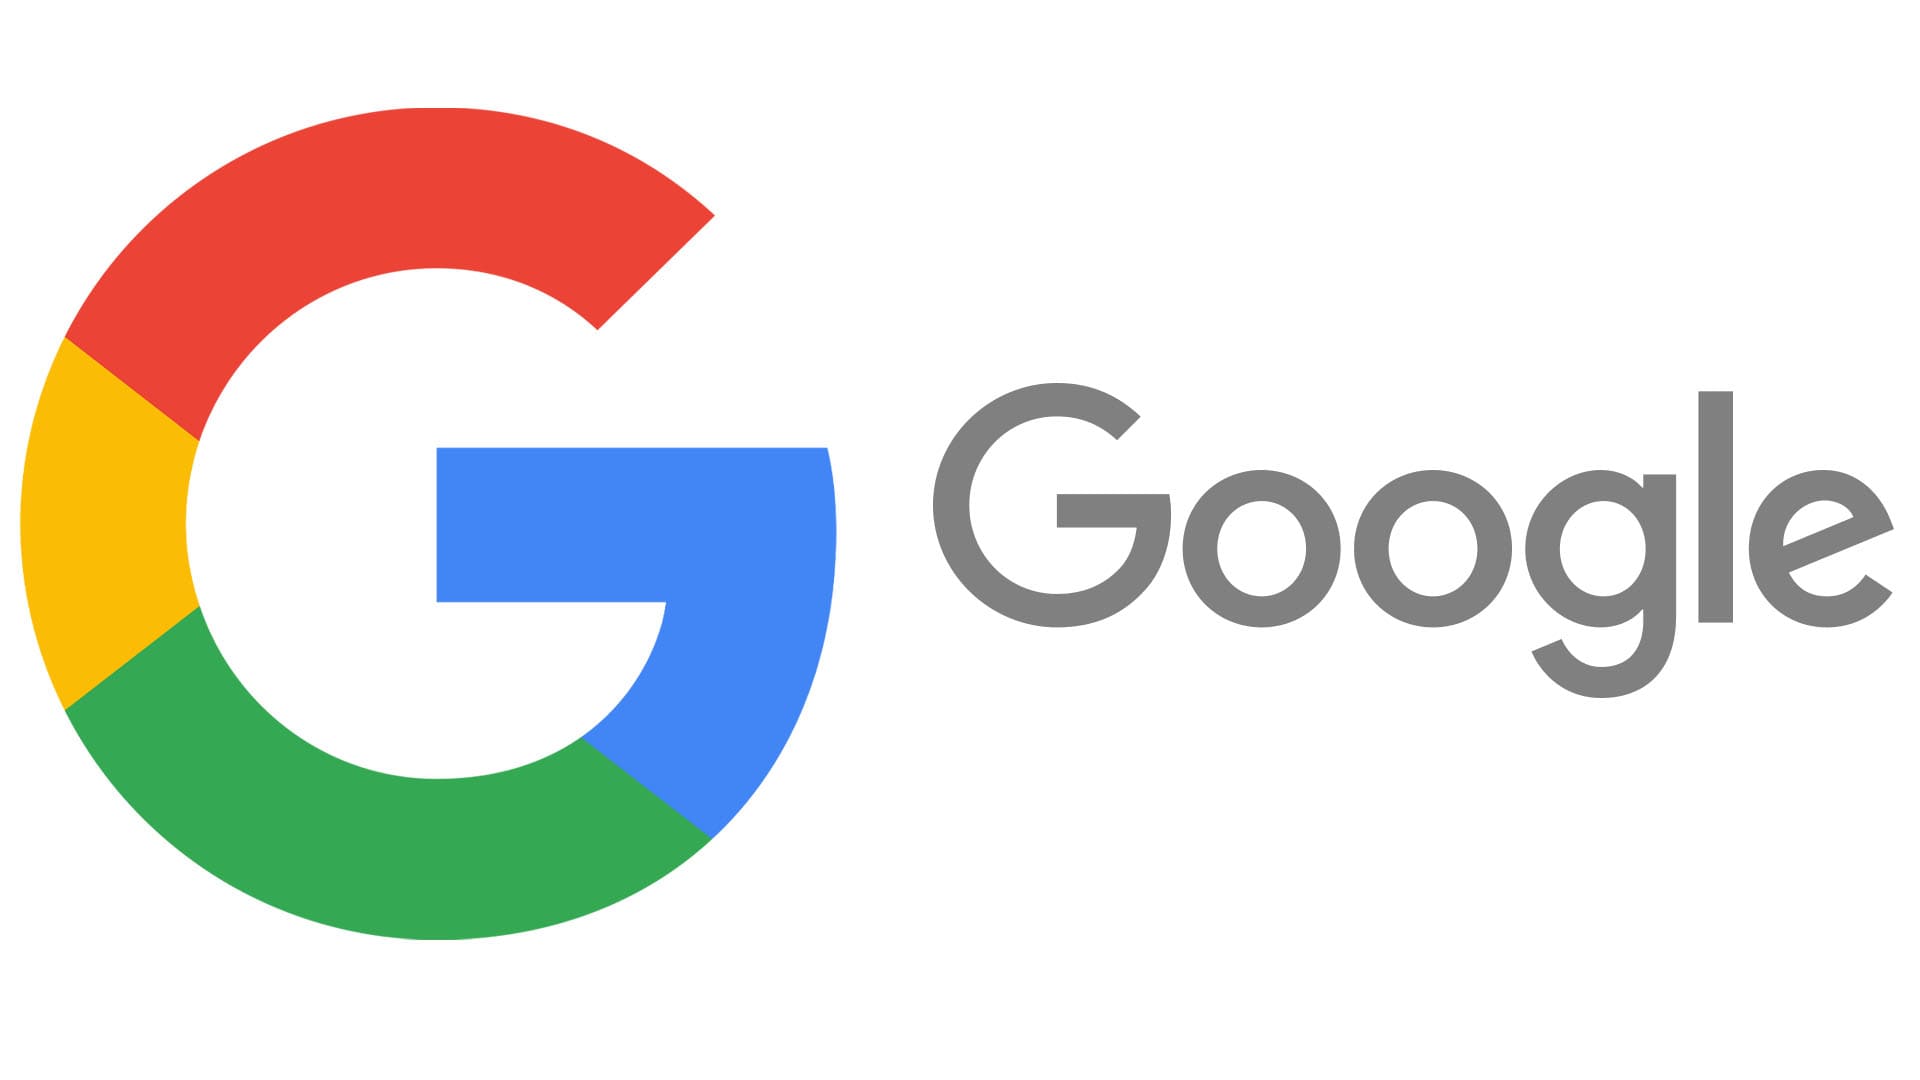 Google G and logo with google colors and gray<br />
